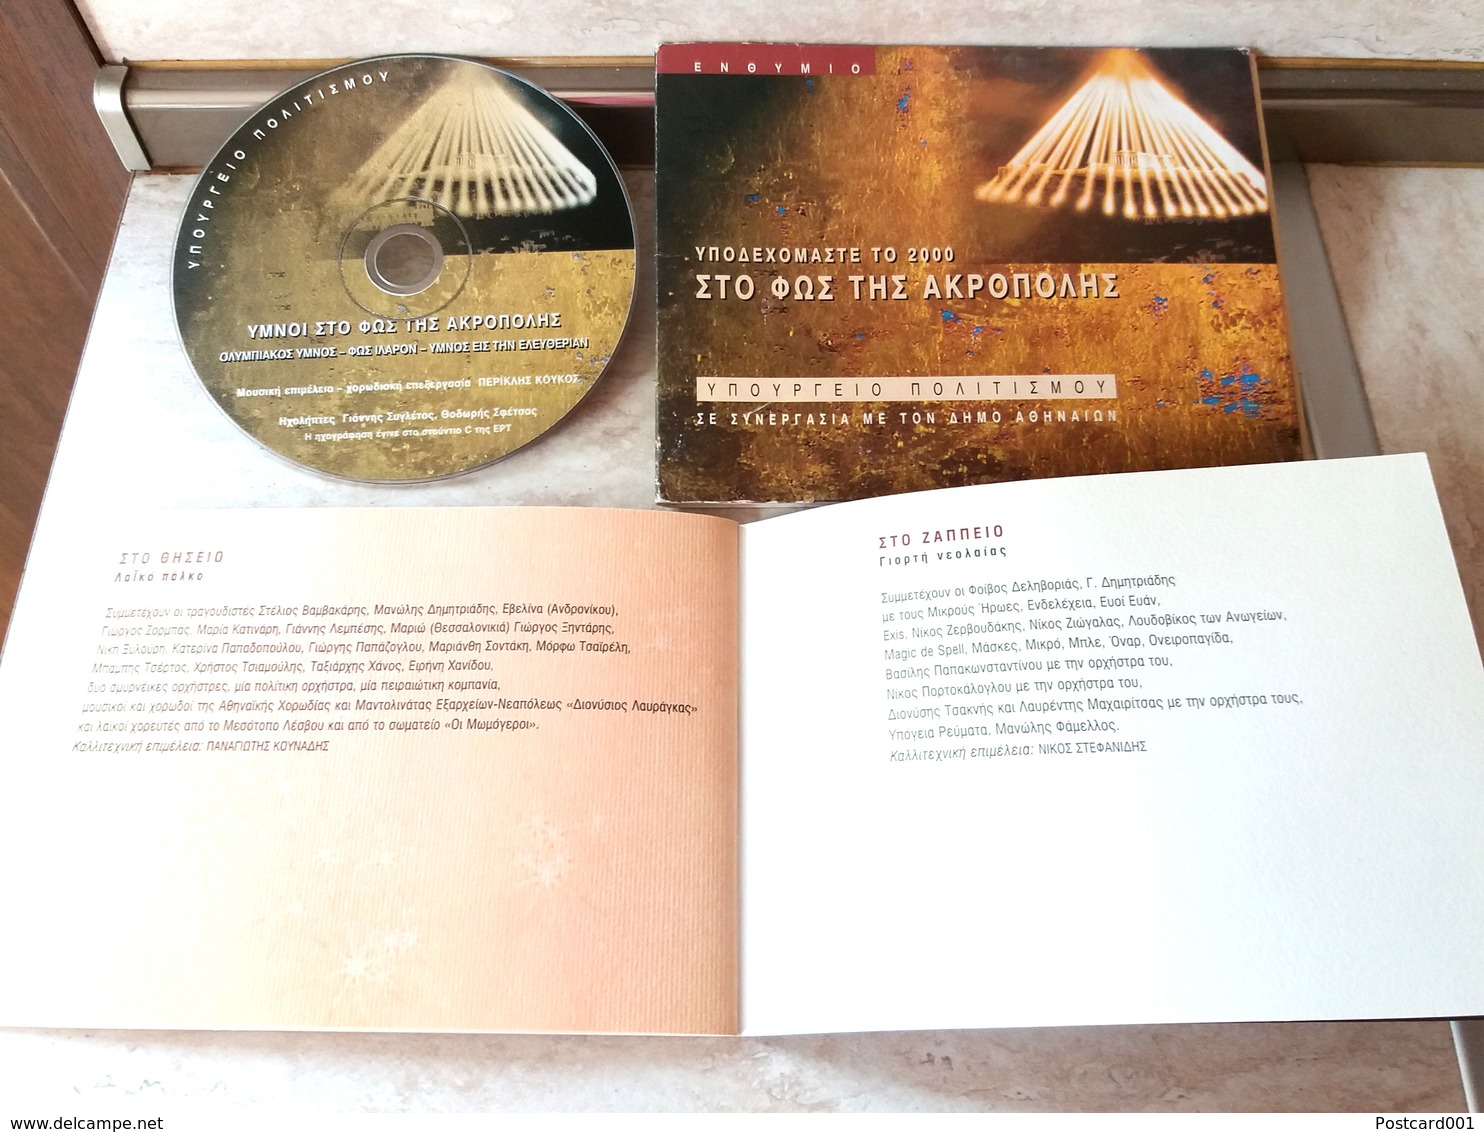 ACROPOLE IN LIGHT AND MUSIC - DVD AND BOOK WITH TEXTS OF GREEK SONGS (2) - DVD Musicaux